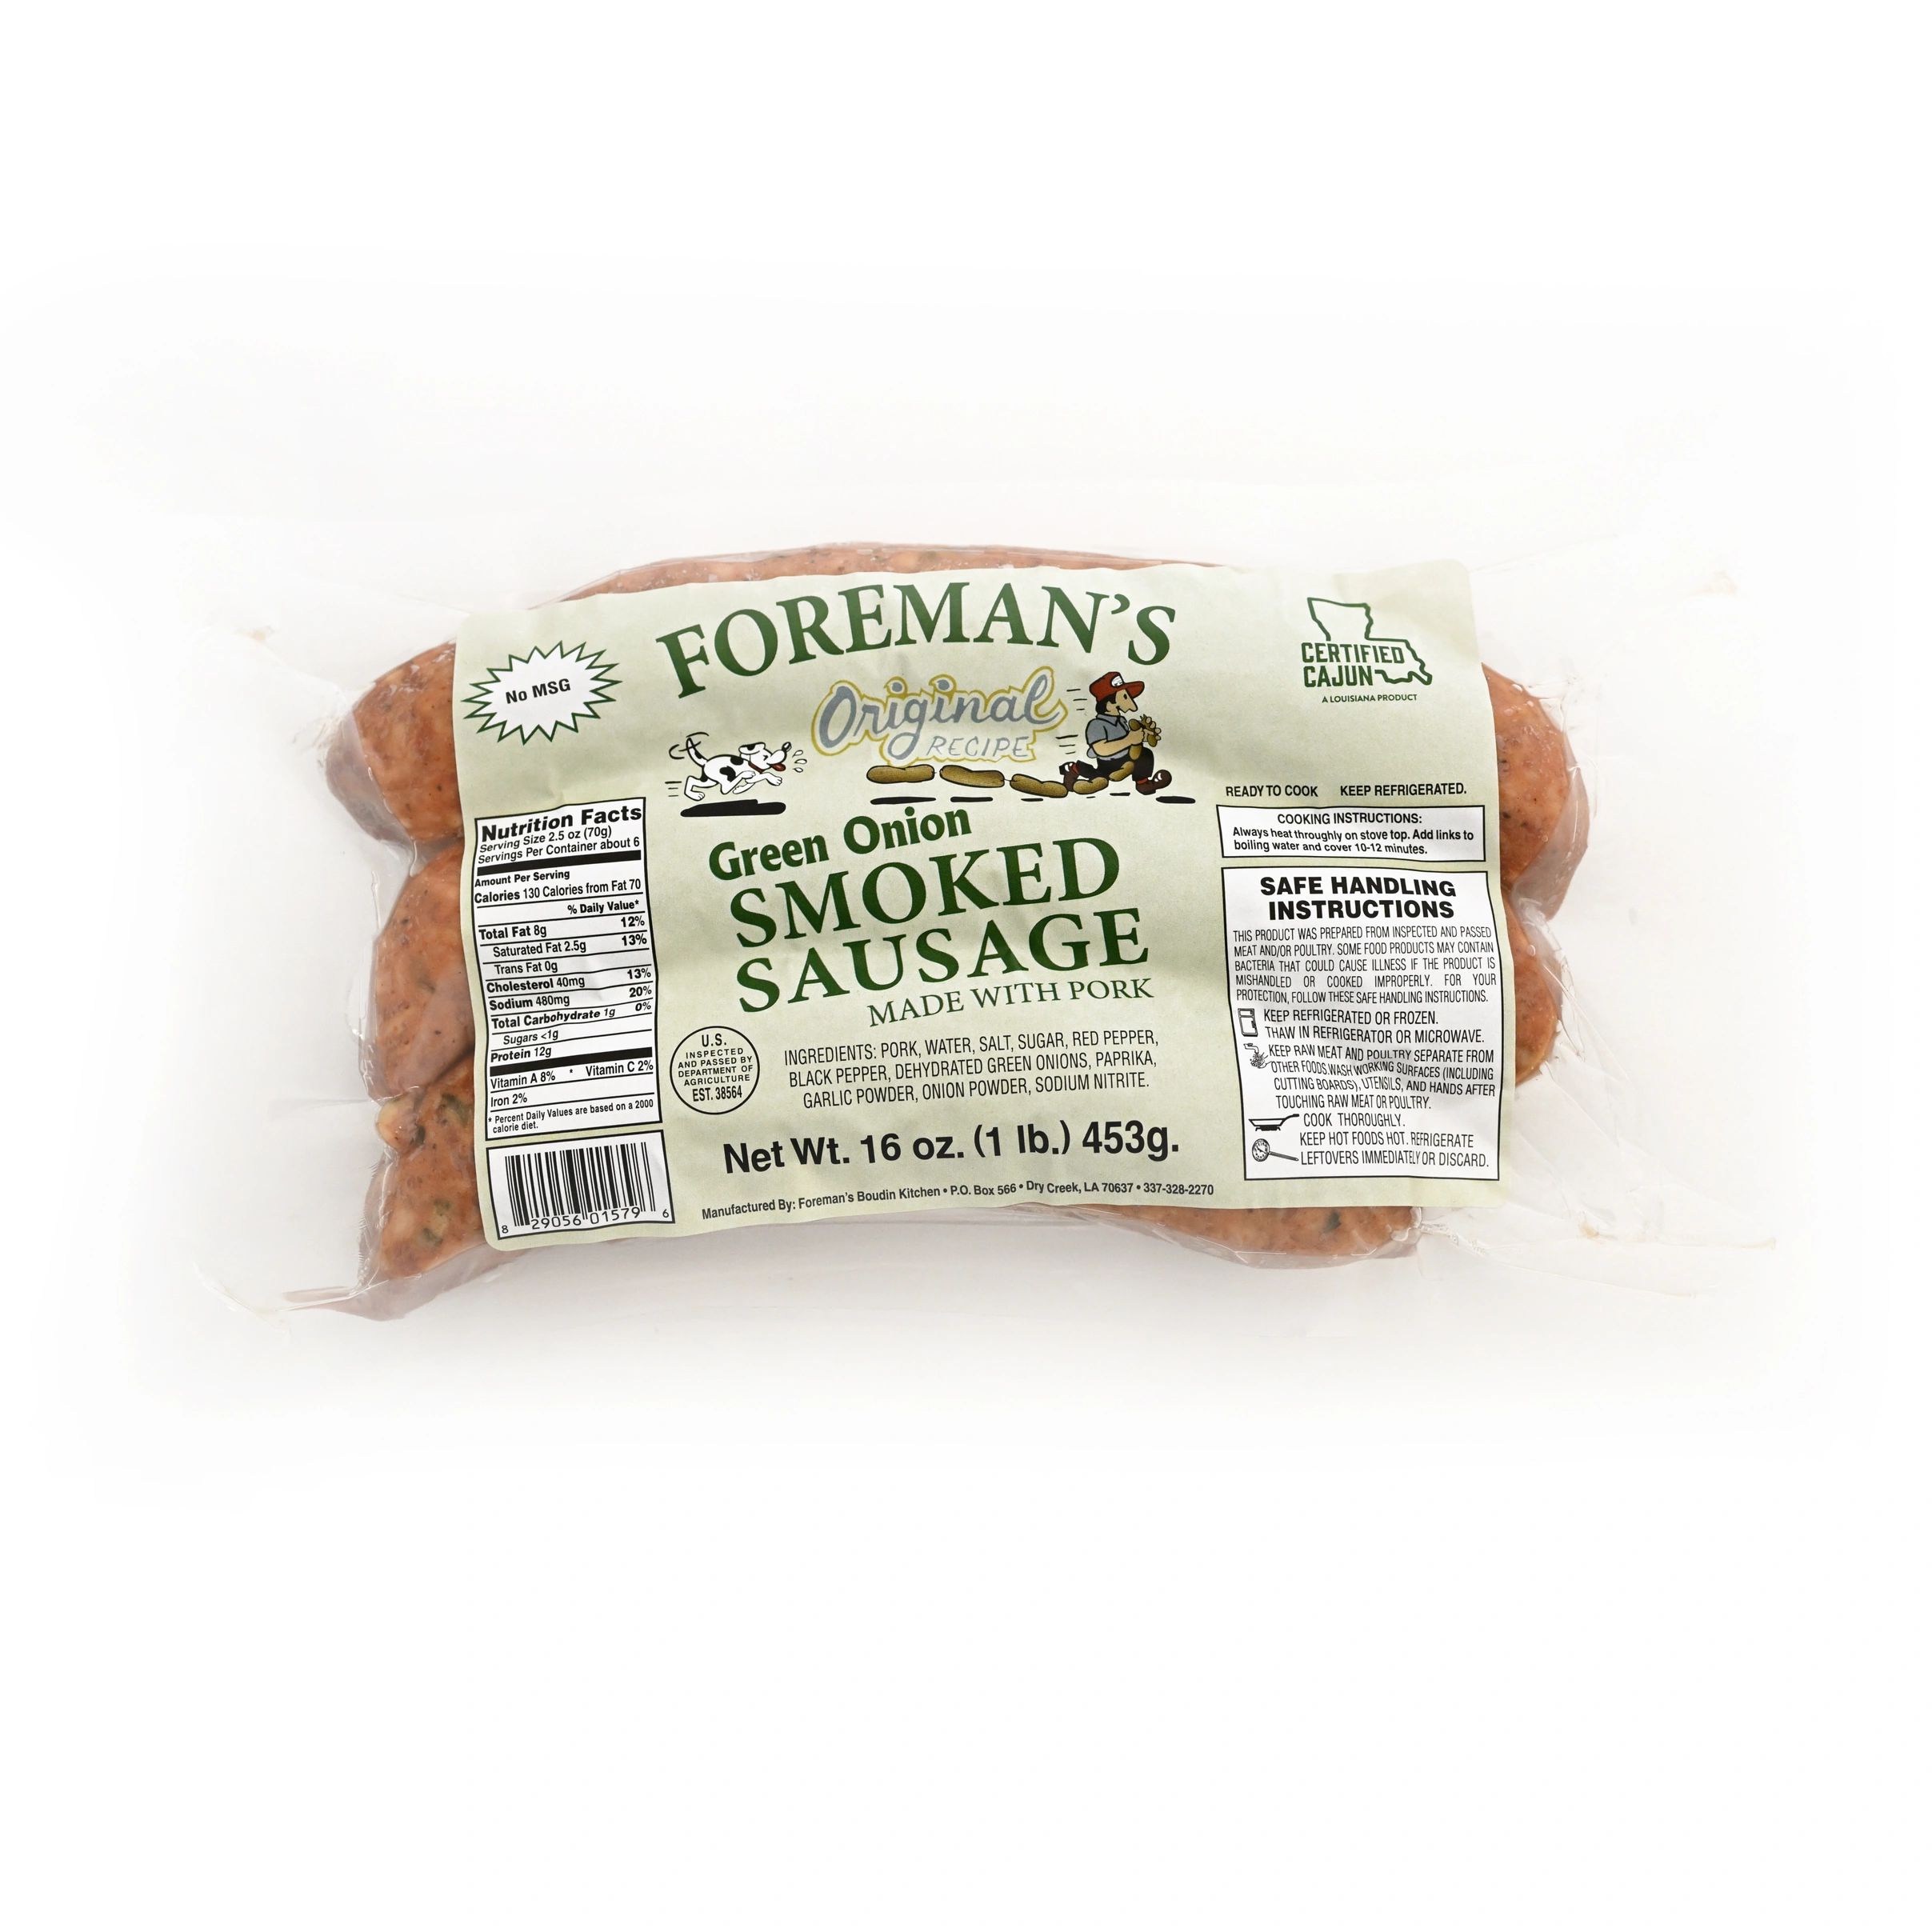 Foremans Green Onion Smoked Sausage made with pork in a 16 oz package on a white background.